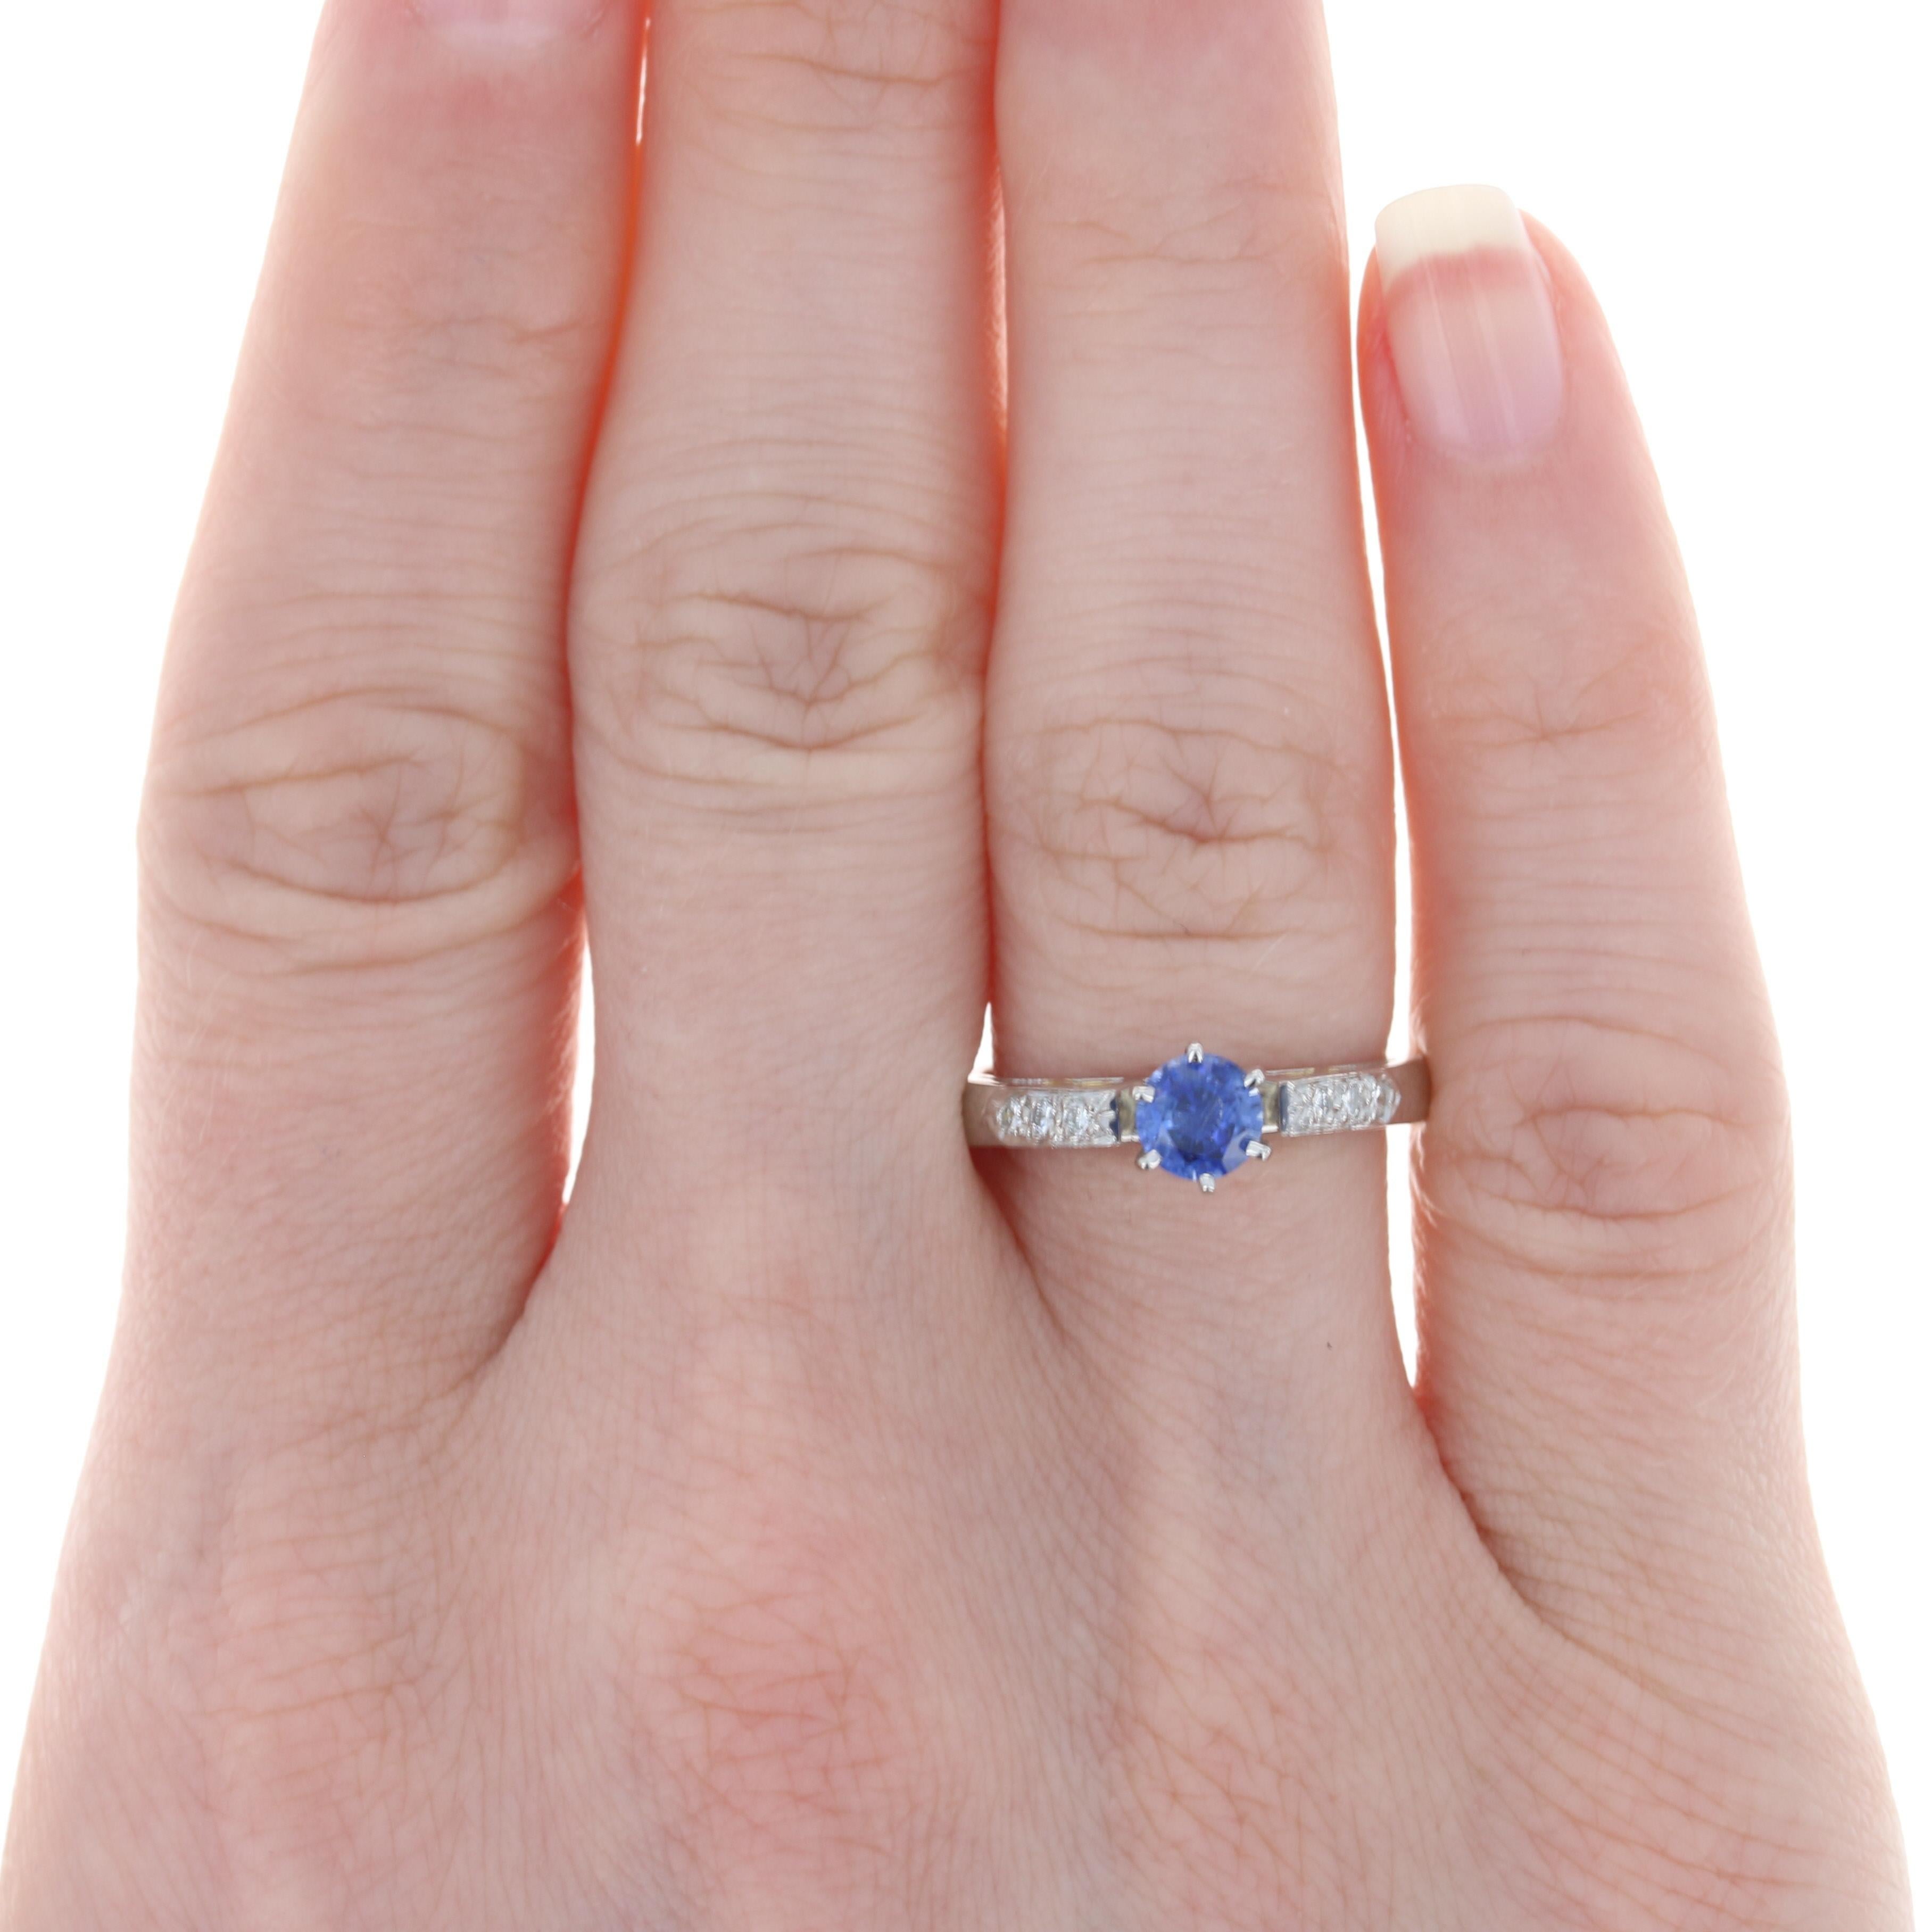 Size: 6
Sizing Fee: Up 2 sizes for $60 or Down 2 sizes for $50

Metal Content: Platinum & 18k Yellow Gold  

Stone Information: 
Genuine Sapphire
Treatment: Heating 
Carat: .58ct
Cut: Round 
Color: Blue 
Diameter: 5mm 

Natural Diamonds
Carats: